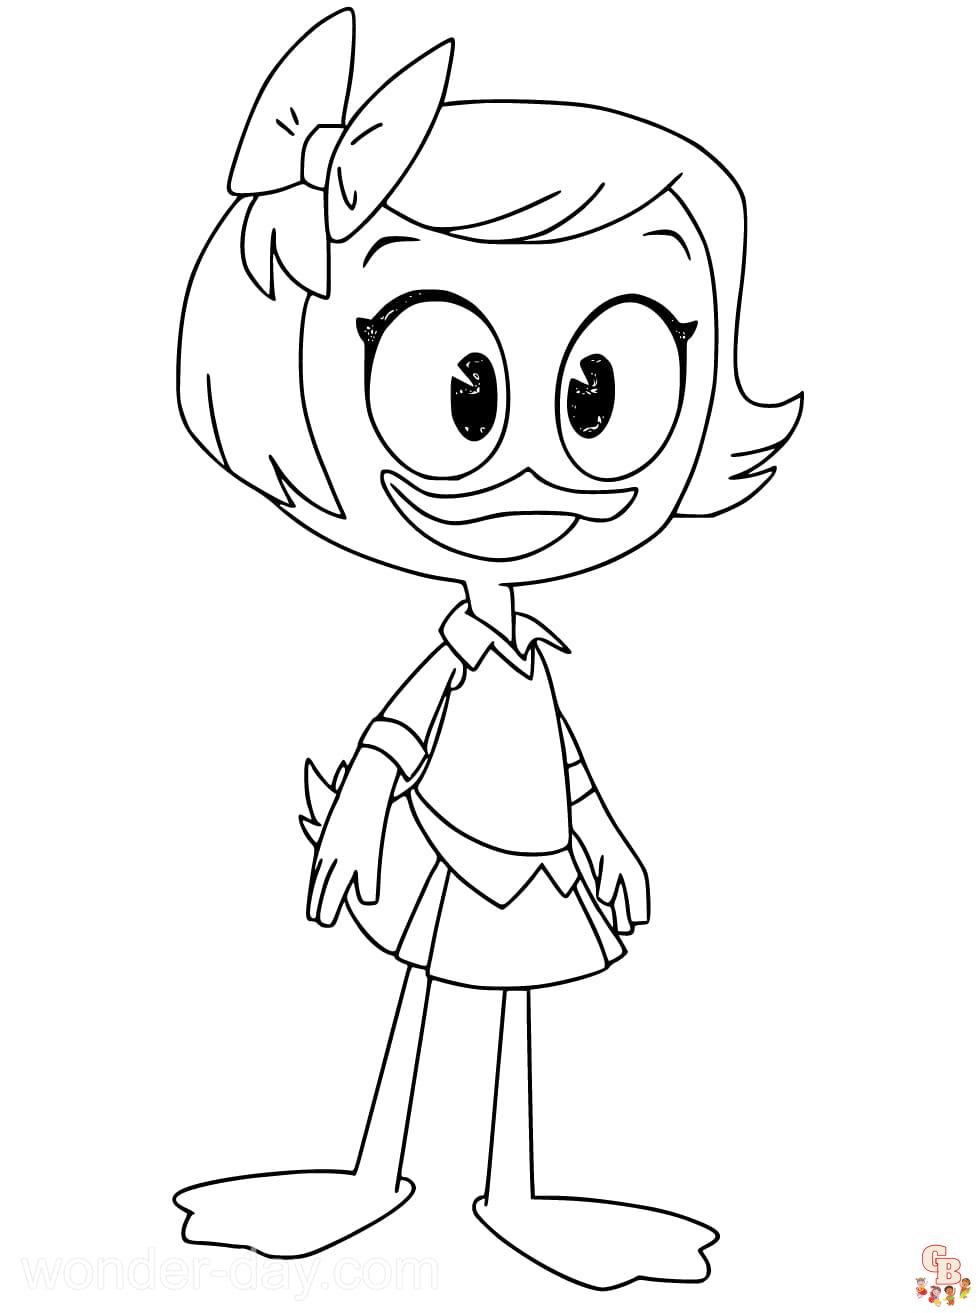 DuckTales Coloring Pages 4